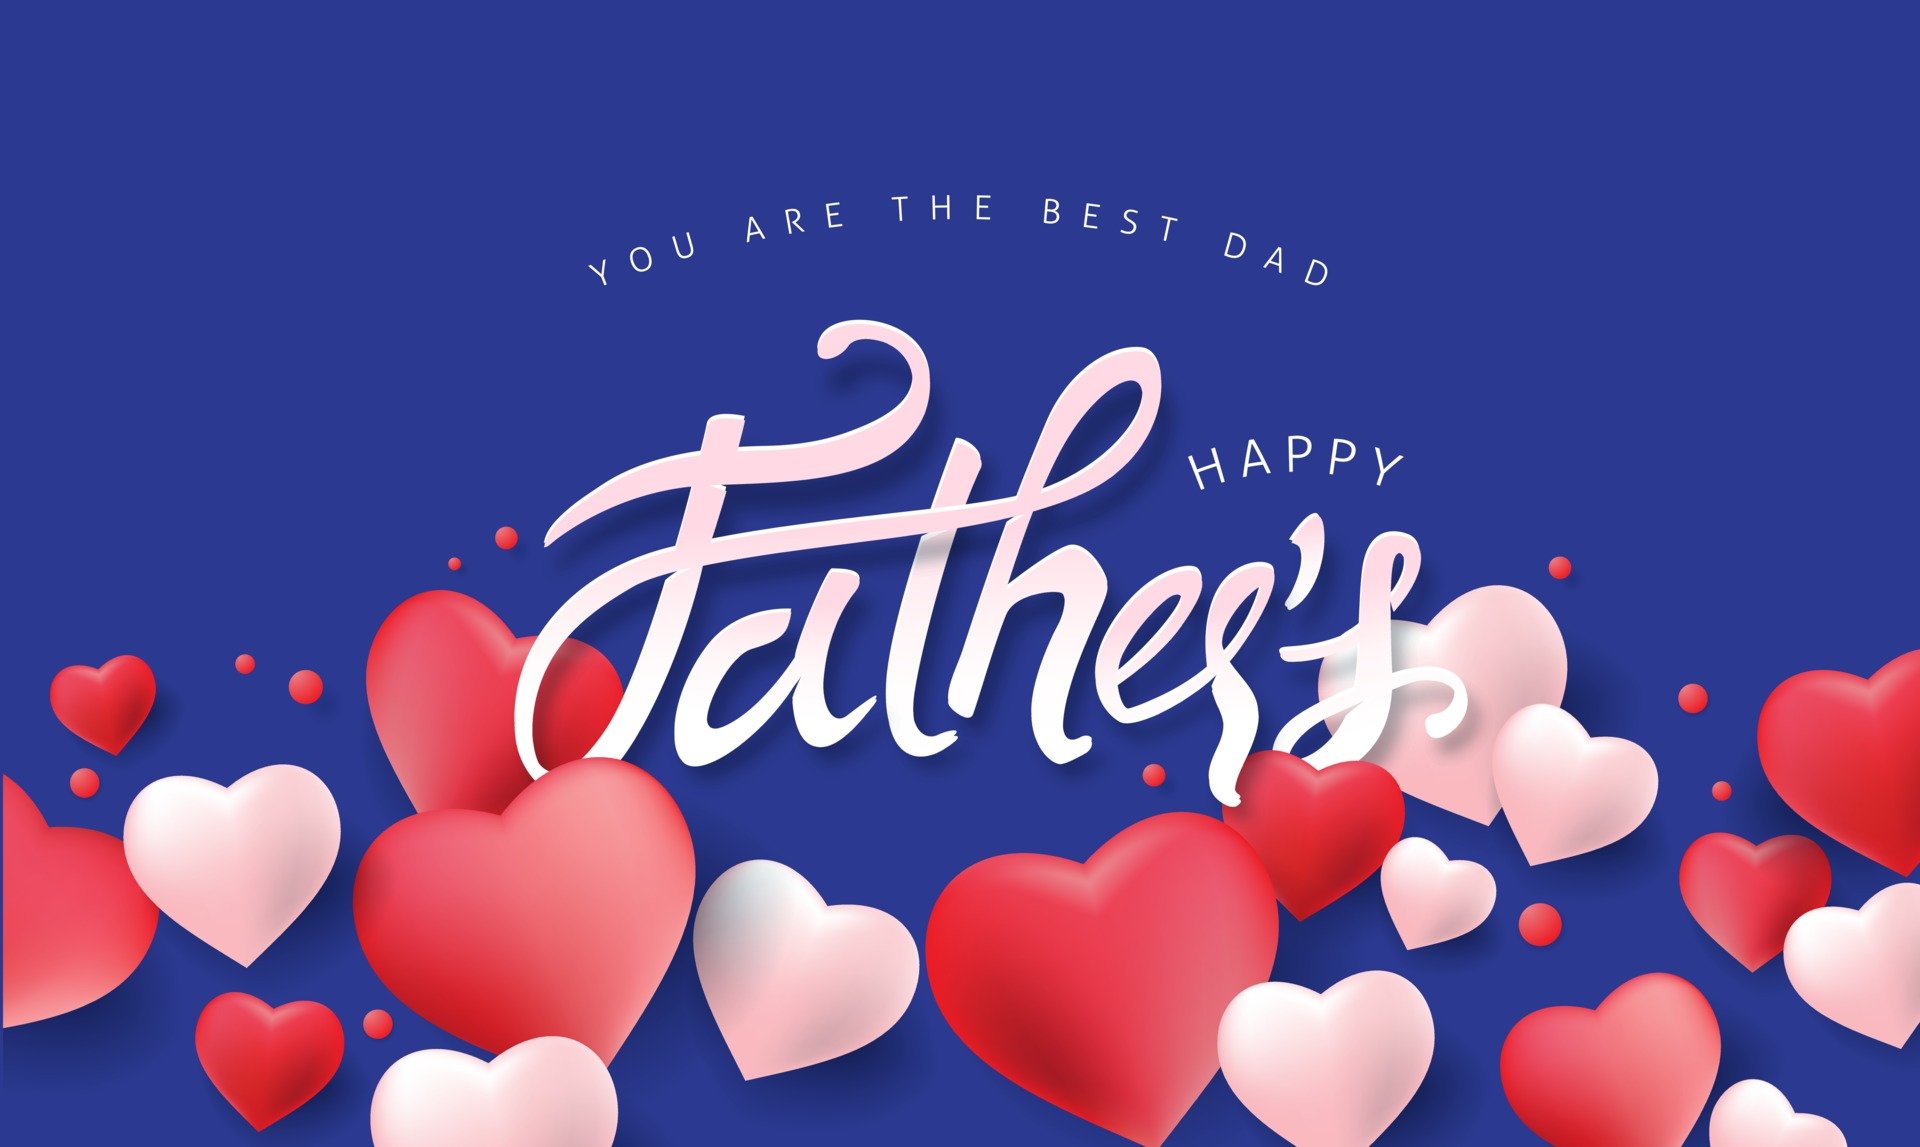 father's day, holiday, happy father's day